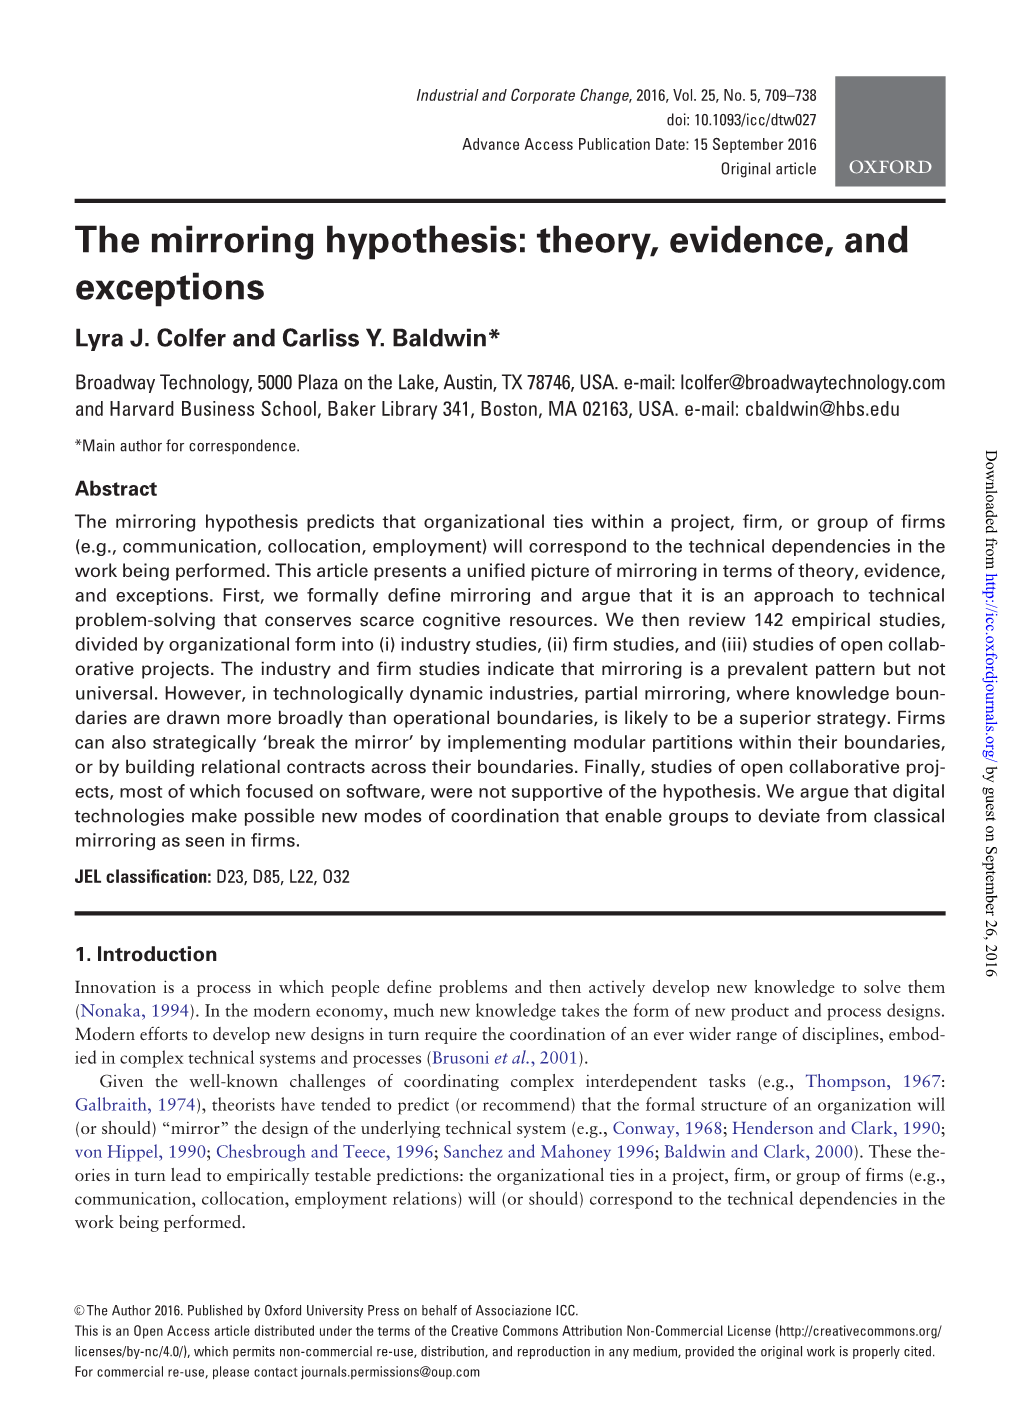 The Mirroring Hypothesis: Theory, Evidence, and Exceptions Lyra J